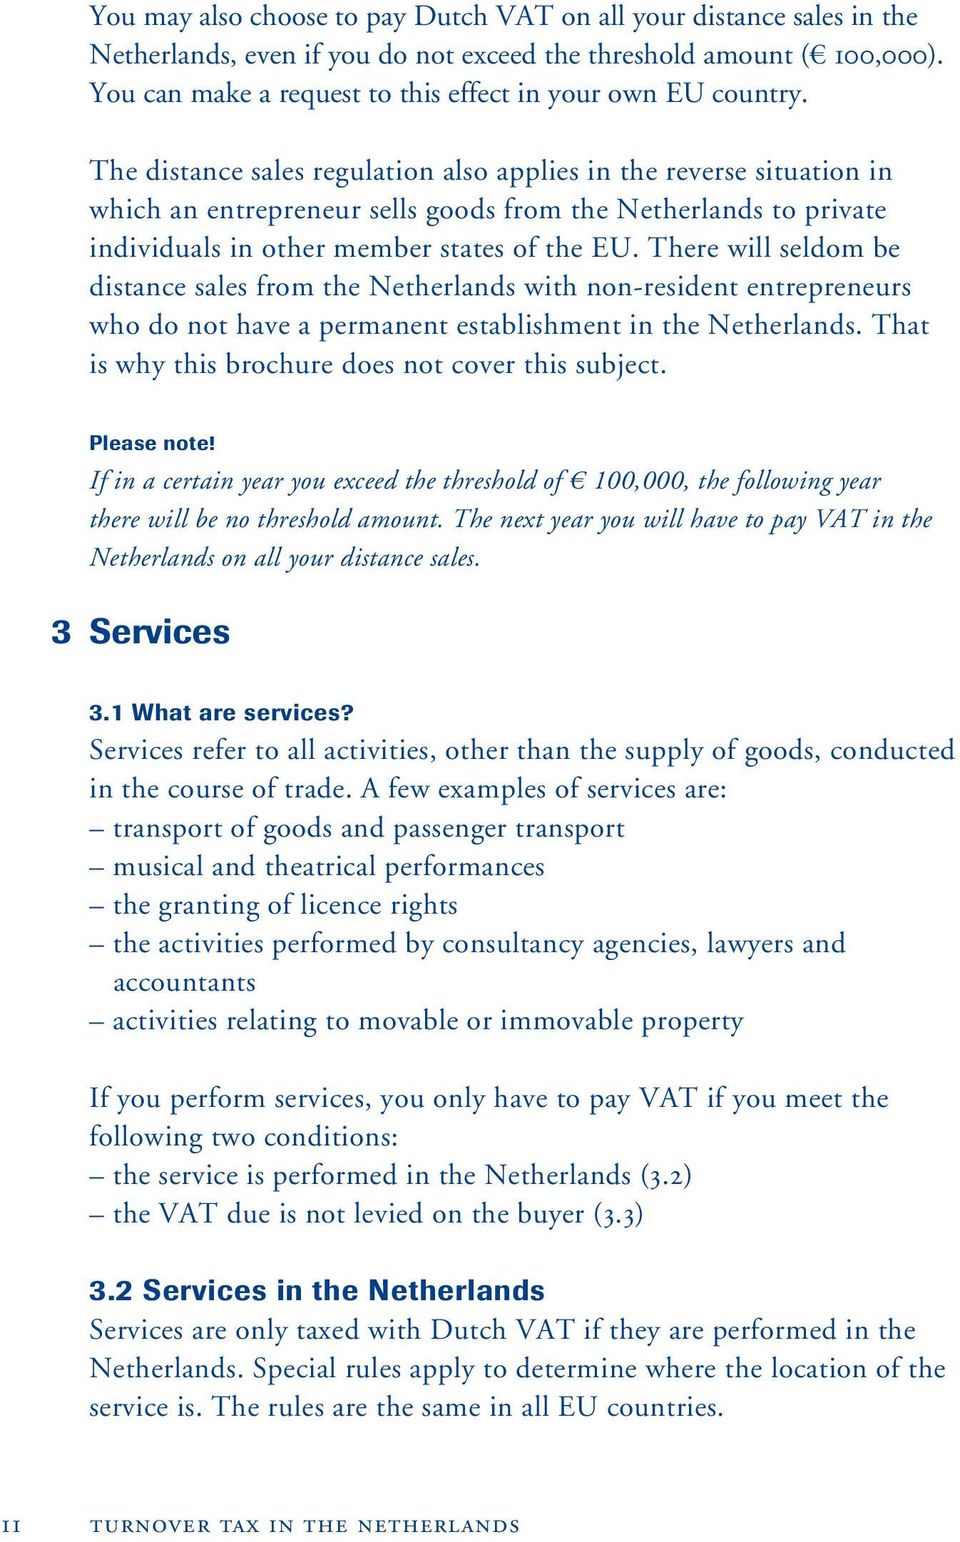 The distance sales regulation also applies in the reverse situation in which an entrepreneur sells goods from the Netherlands to private individuals in other member states of the EU.